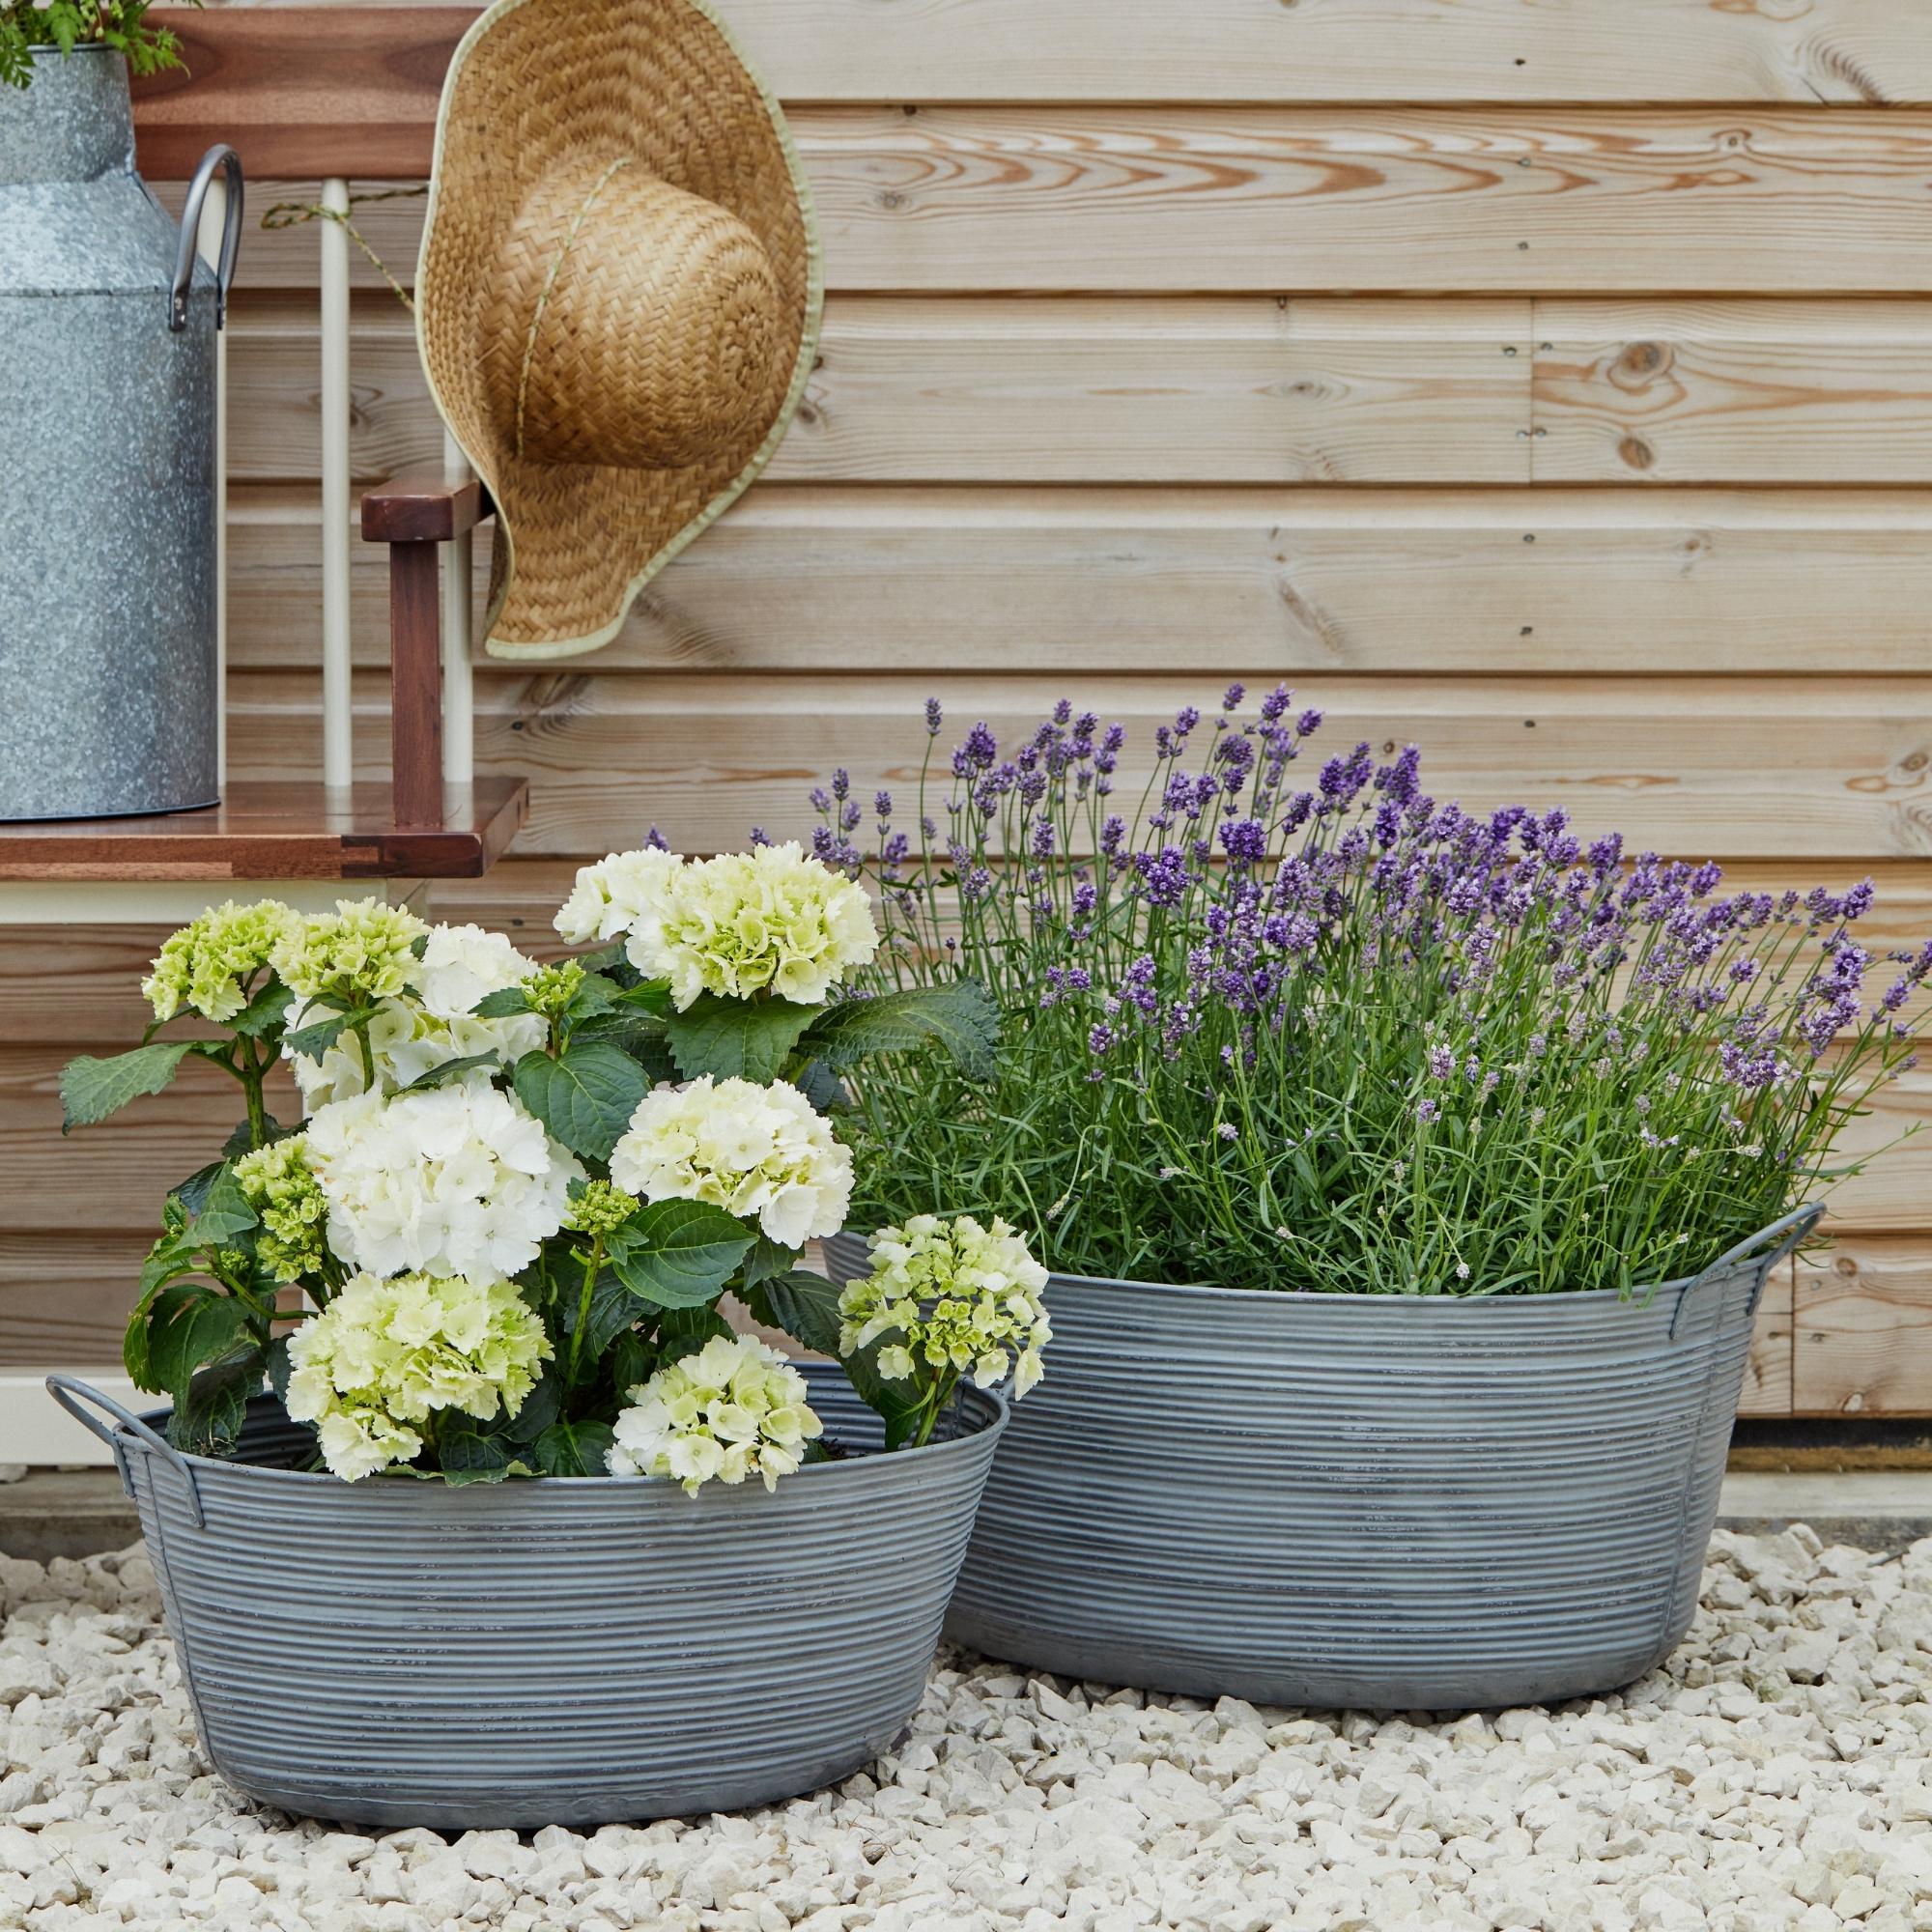 Outdoor Matlock Oval Planter Large